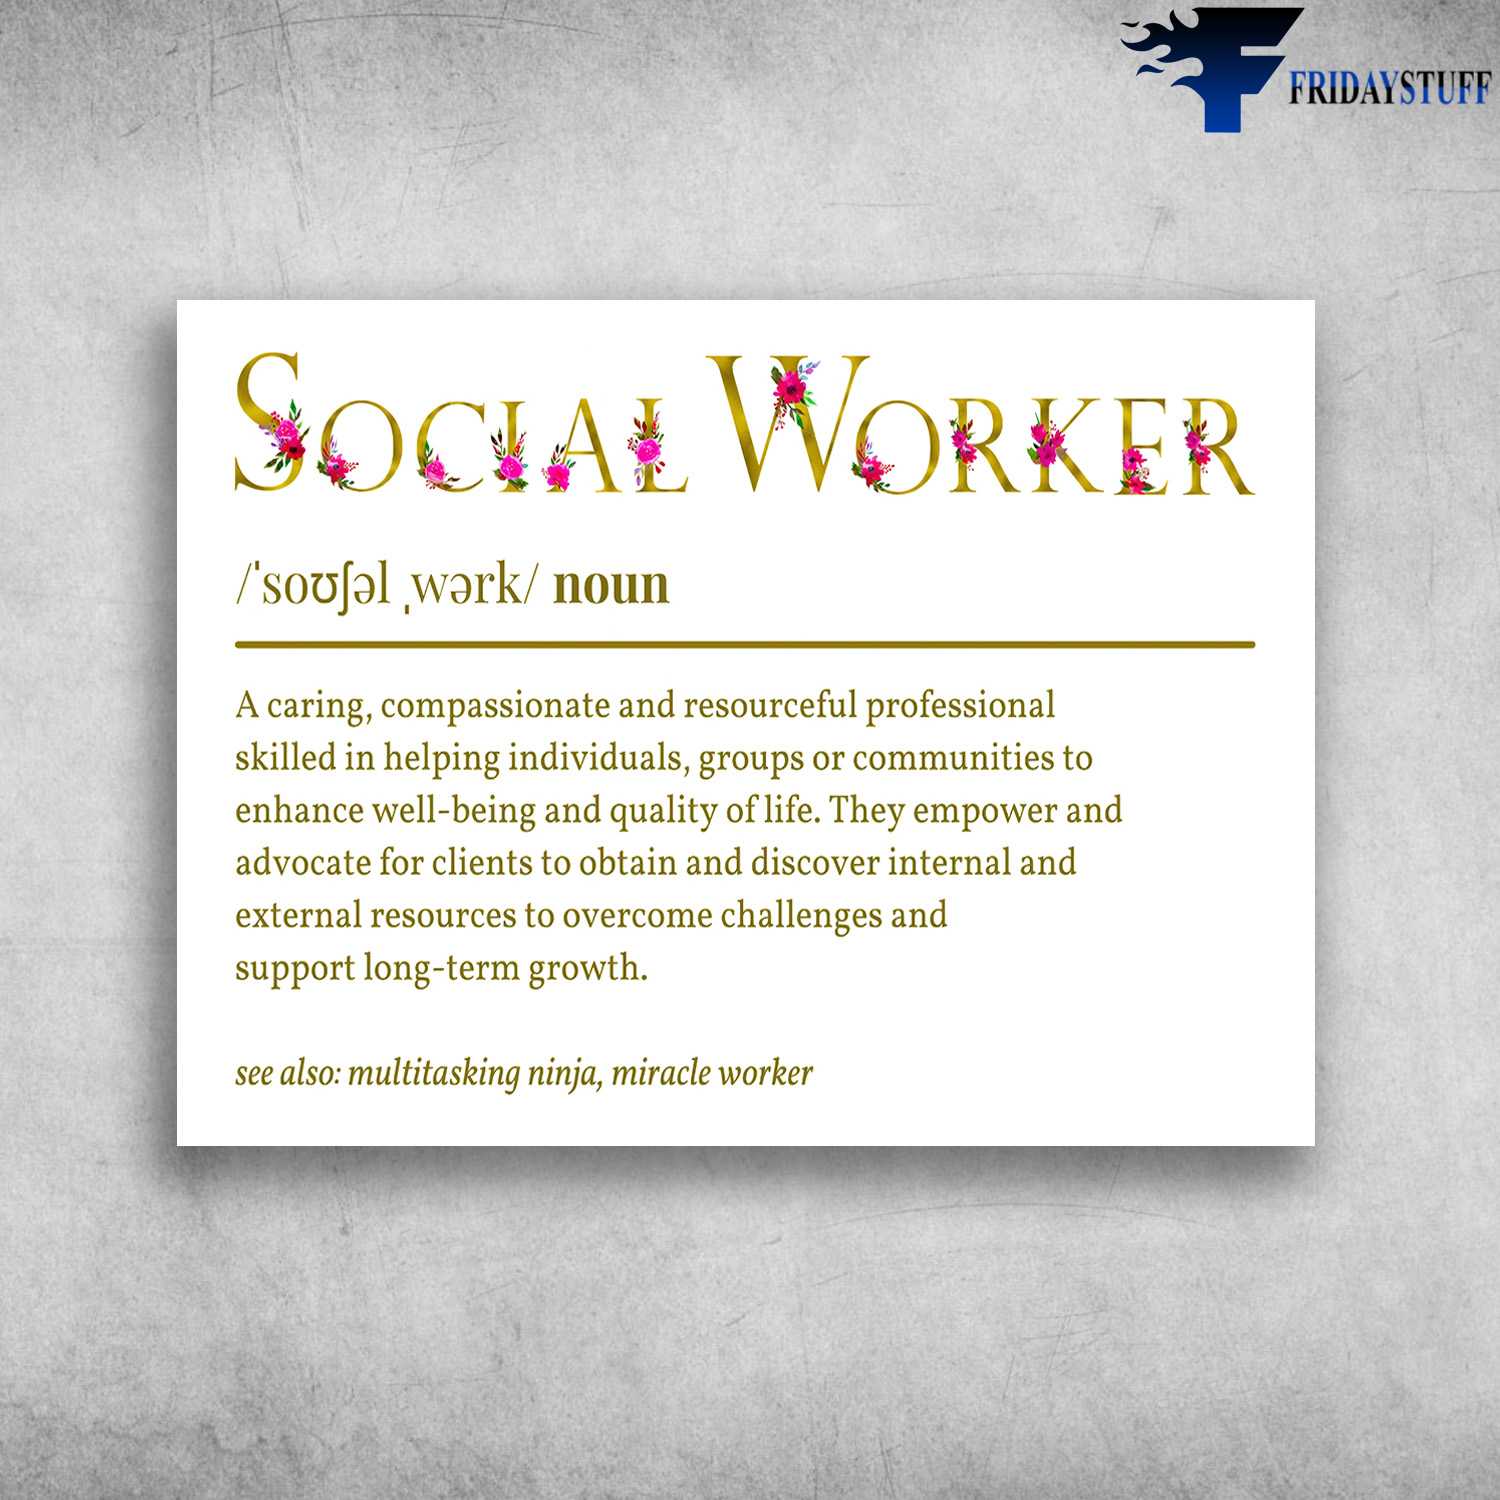 Social Worker - A Caring, Compassionate And Resourceful Professional, Skilled In Helping Individuals, Groups Or Communities